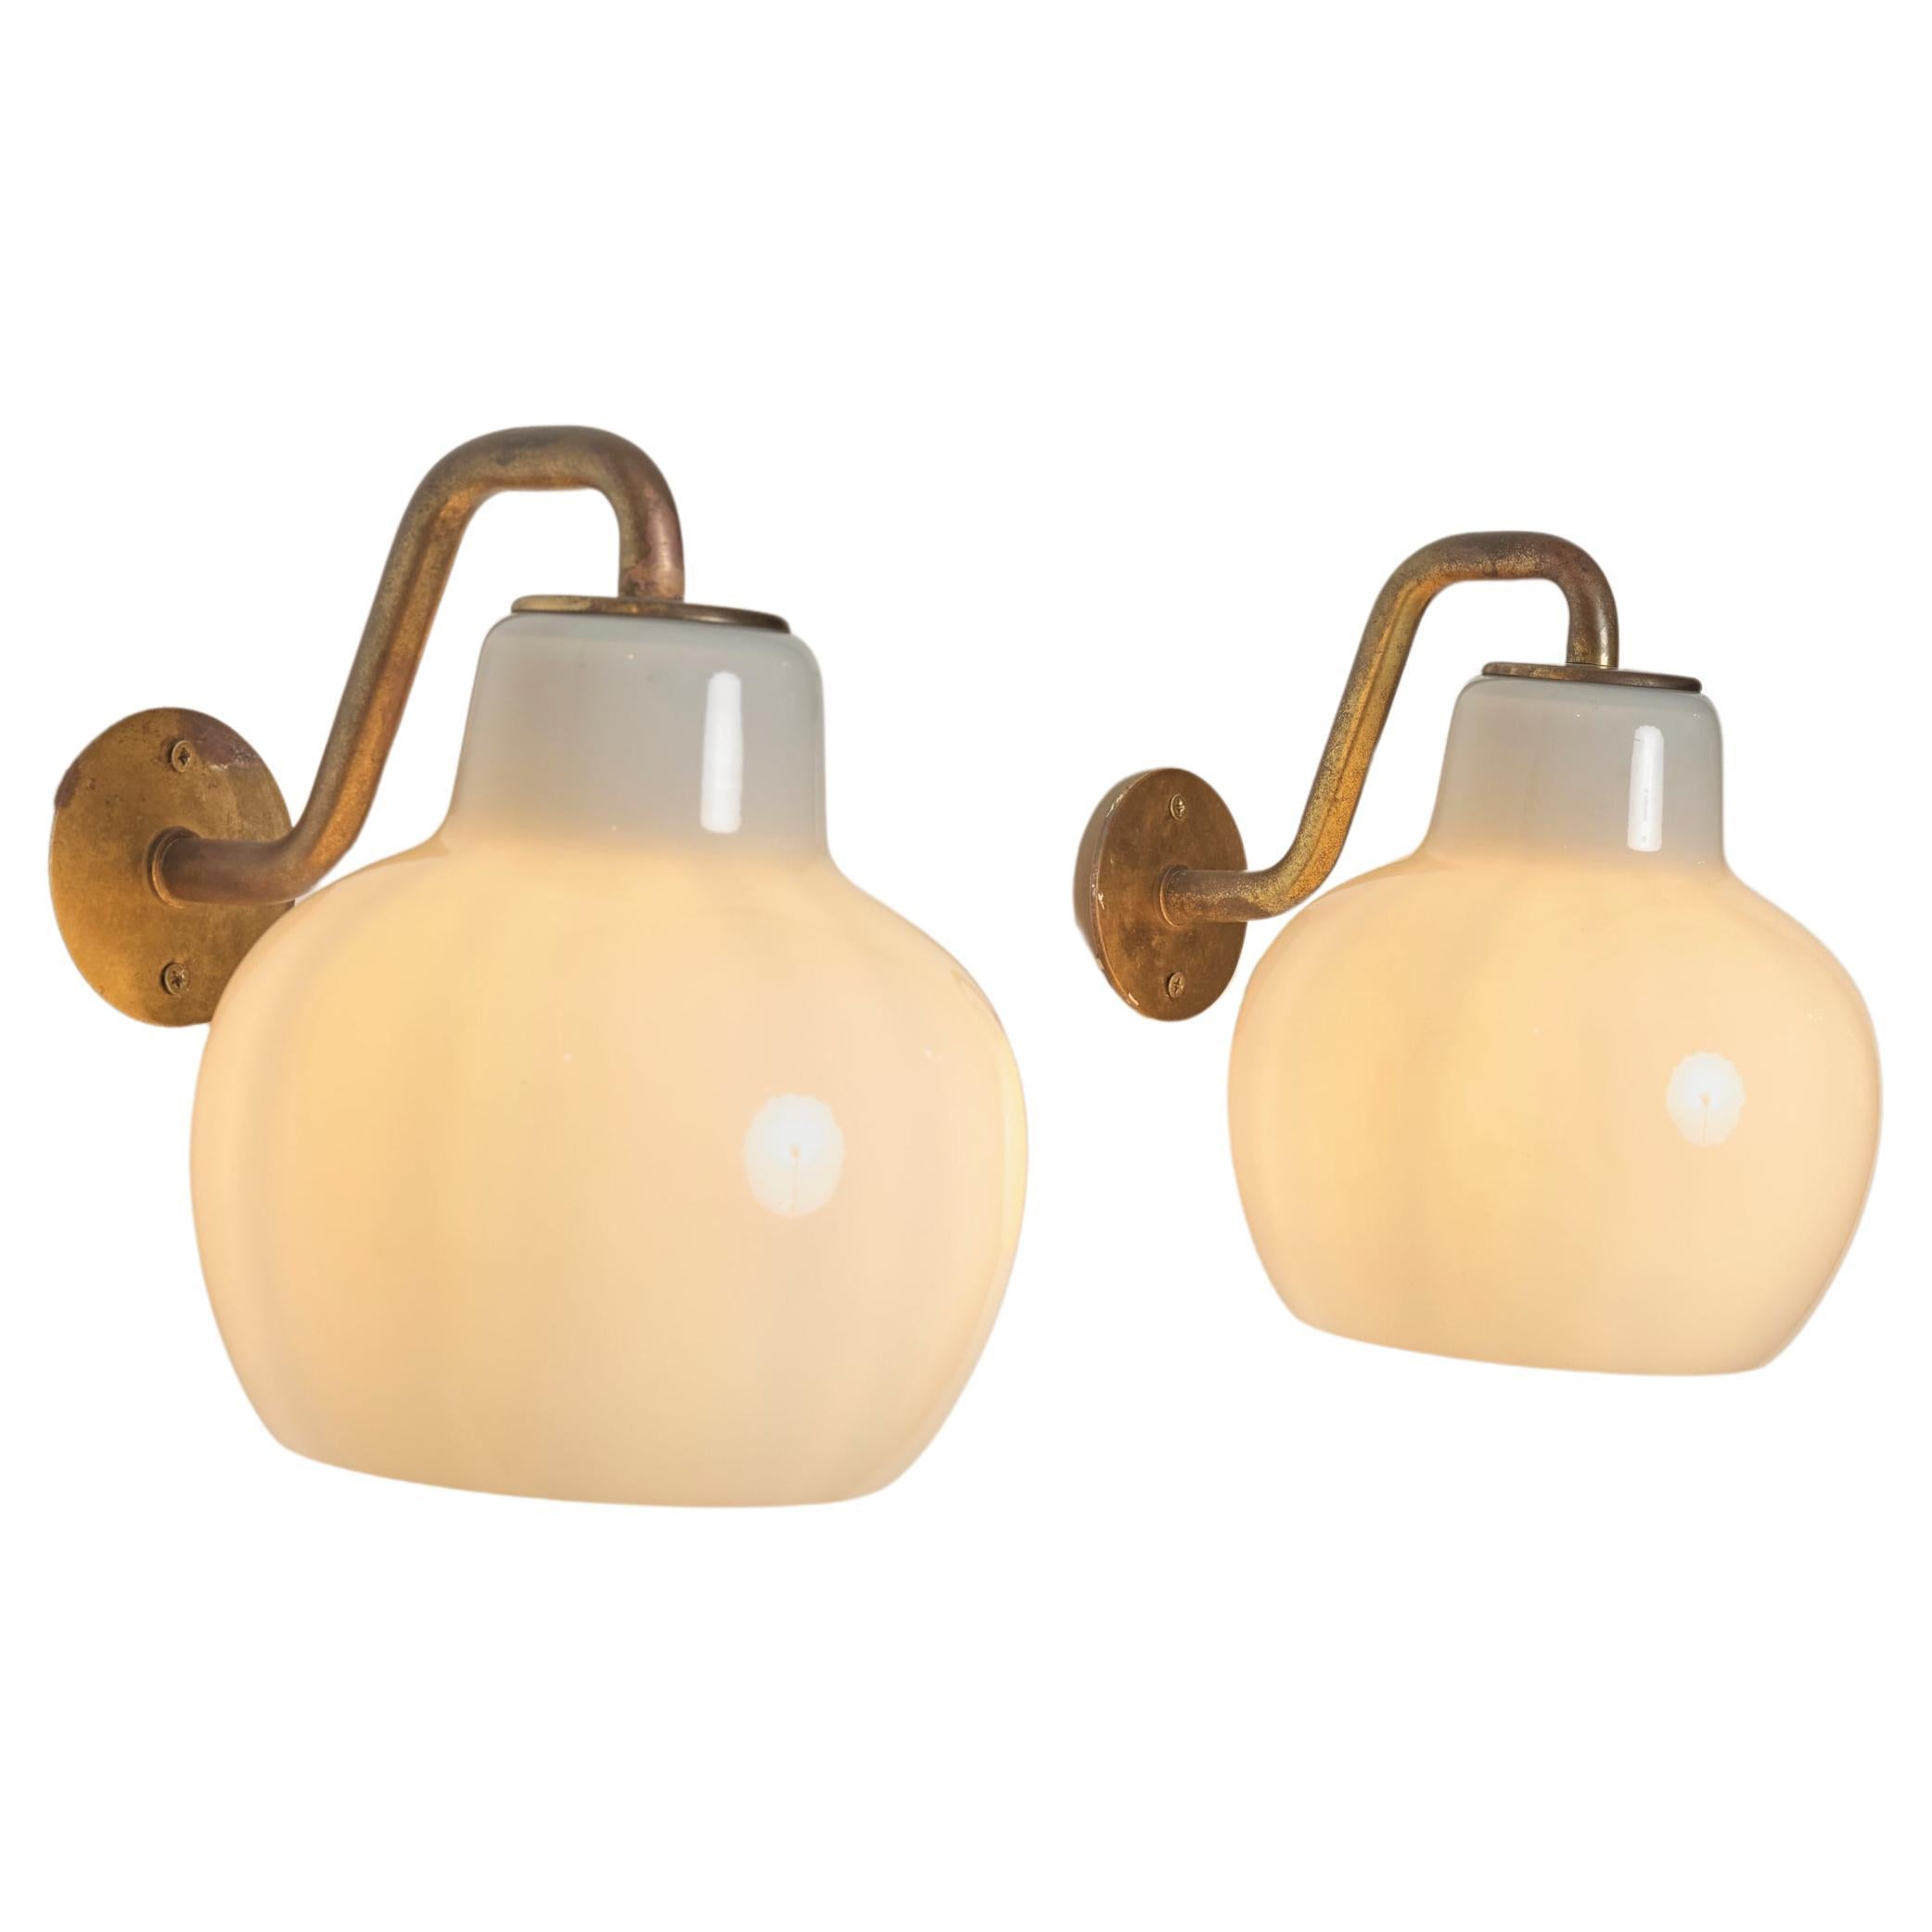 A Pair of Brass and Glass Wall Sconces by Vilhelm Lauritzen for Louis Poulsen